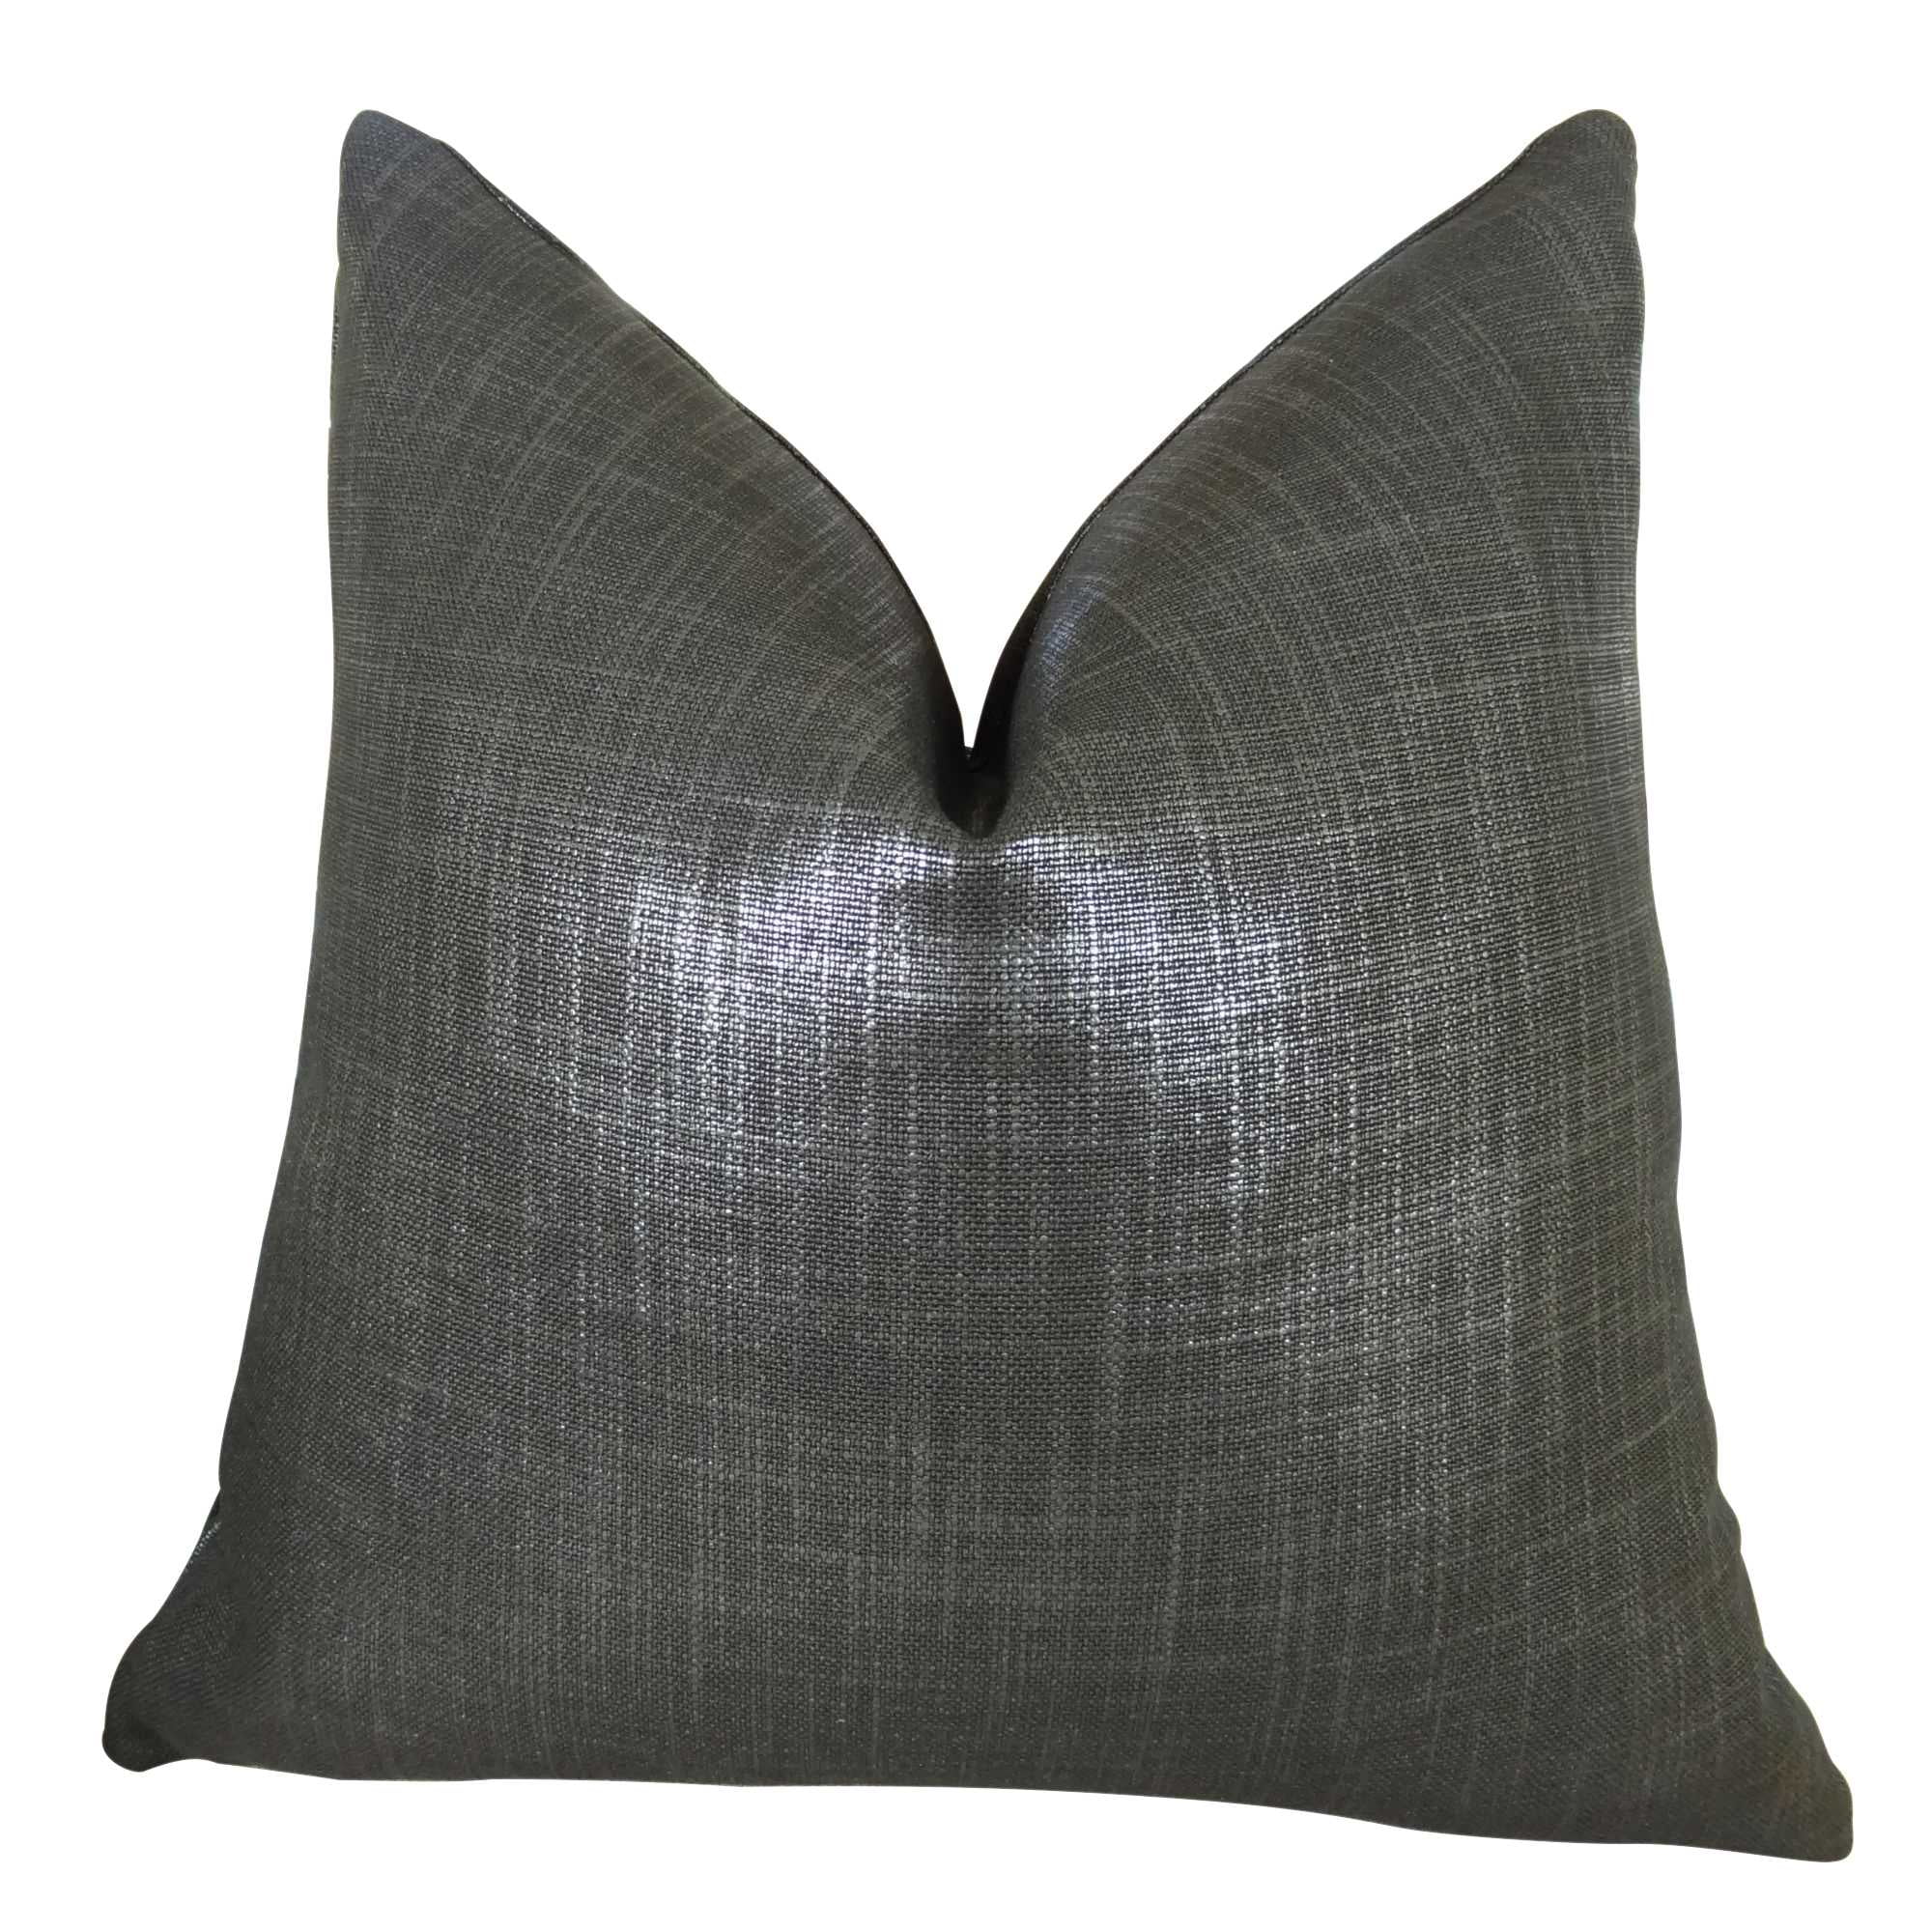 glazed linen throw pillow Shiny sammer pillow Metallic off white cotton cushion cover On sale Decorative cushion cover 30% off